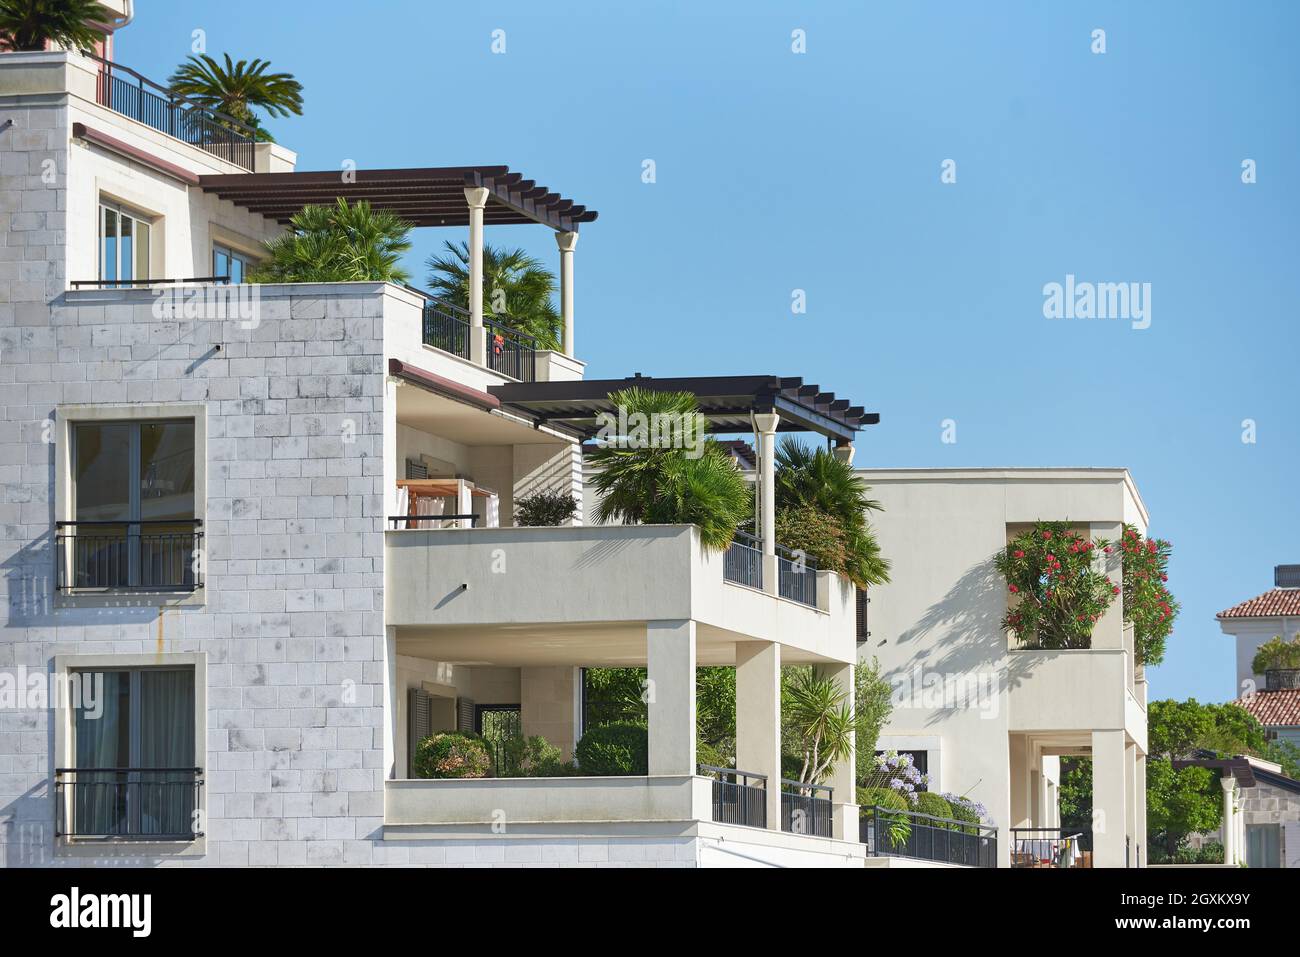 Roof patio with plants decoration on modern residential building in European city Stock Photo